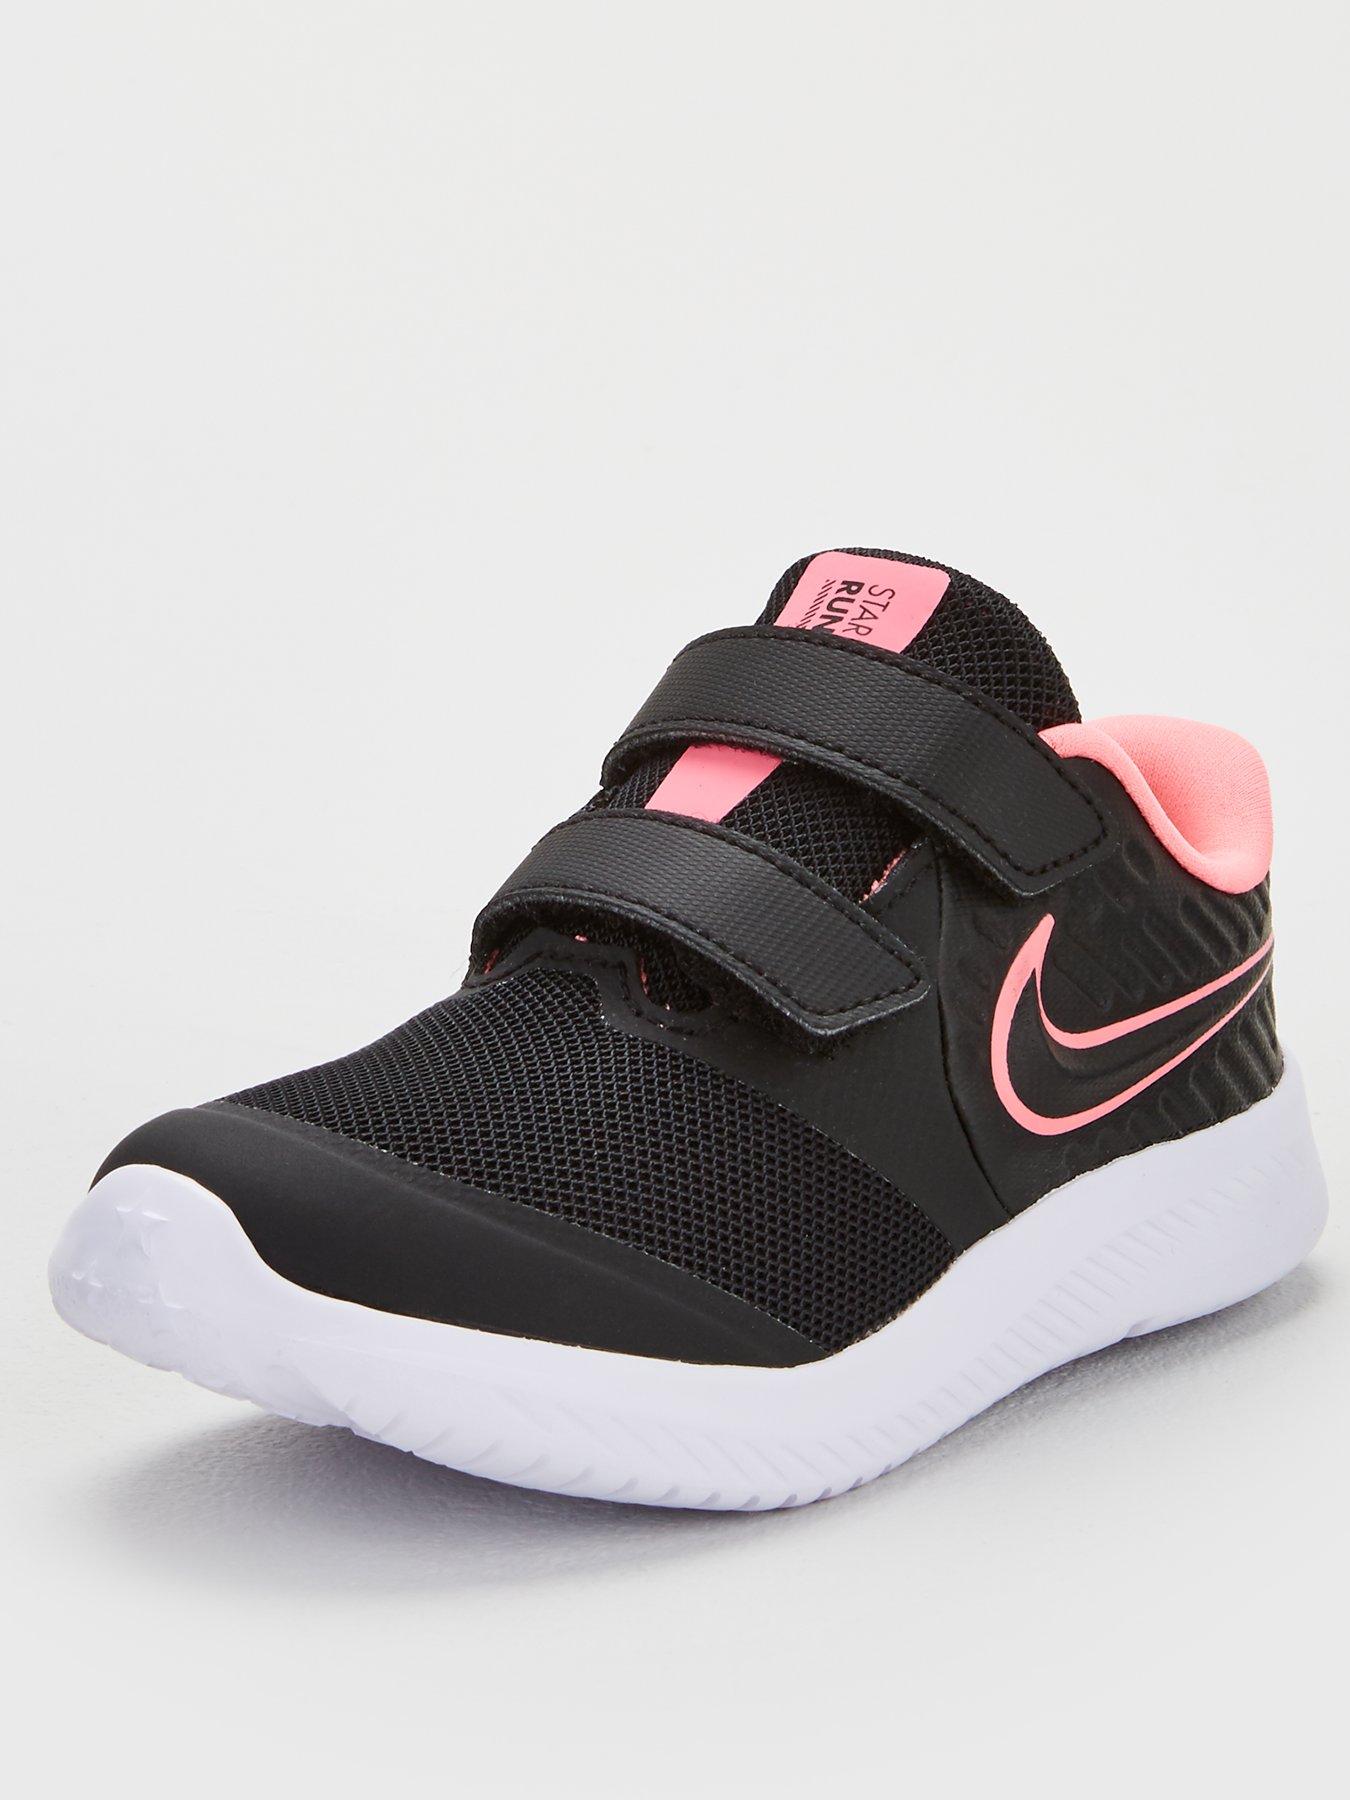 nike infant trainers size 9.5